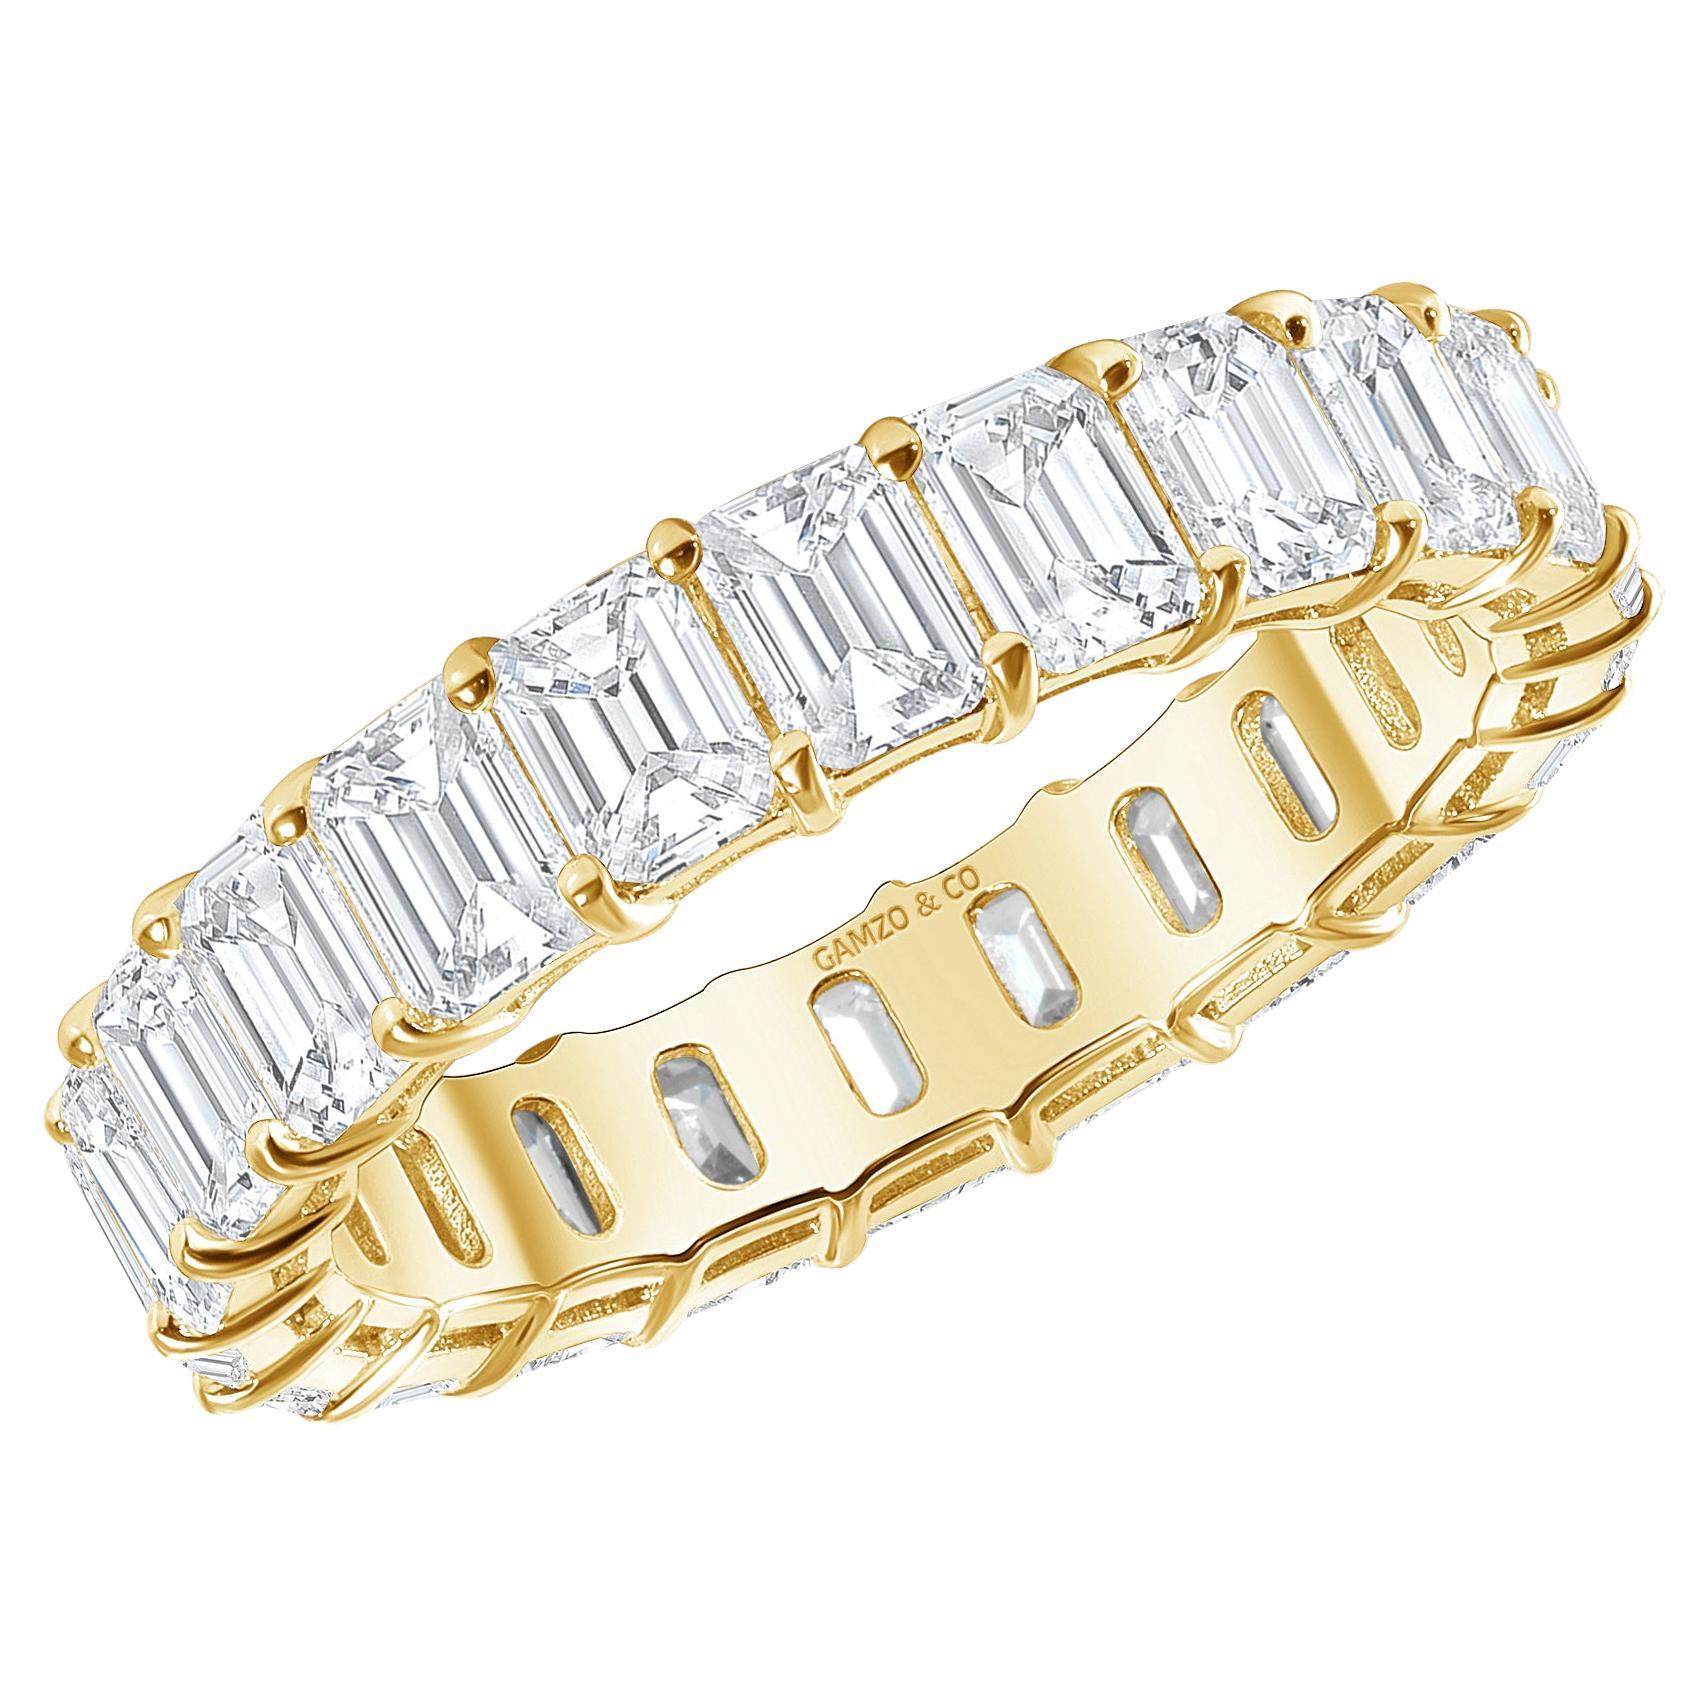 For Sale:  18k Yellow Gold 2.5 Carat Emerald Cut Natural Diamond Eternity Ring